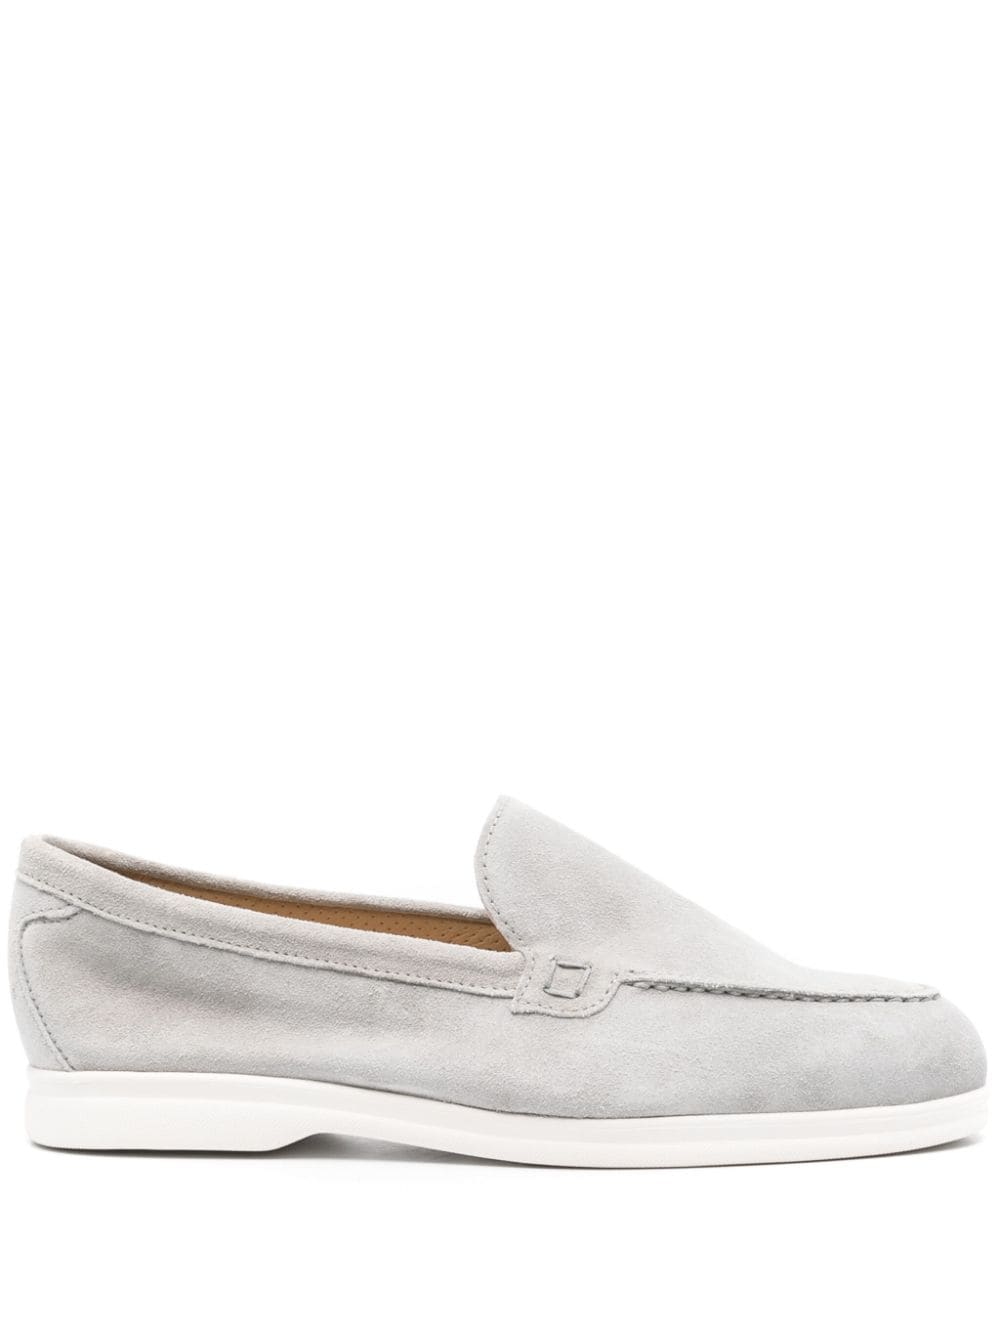 Doucal's slip-on suede moccasins - Grey von Doucal's